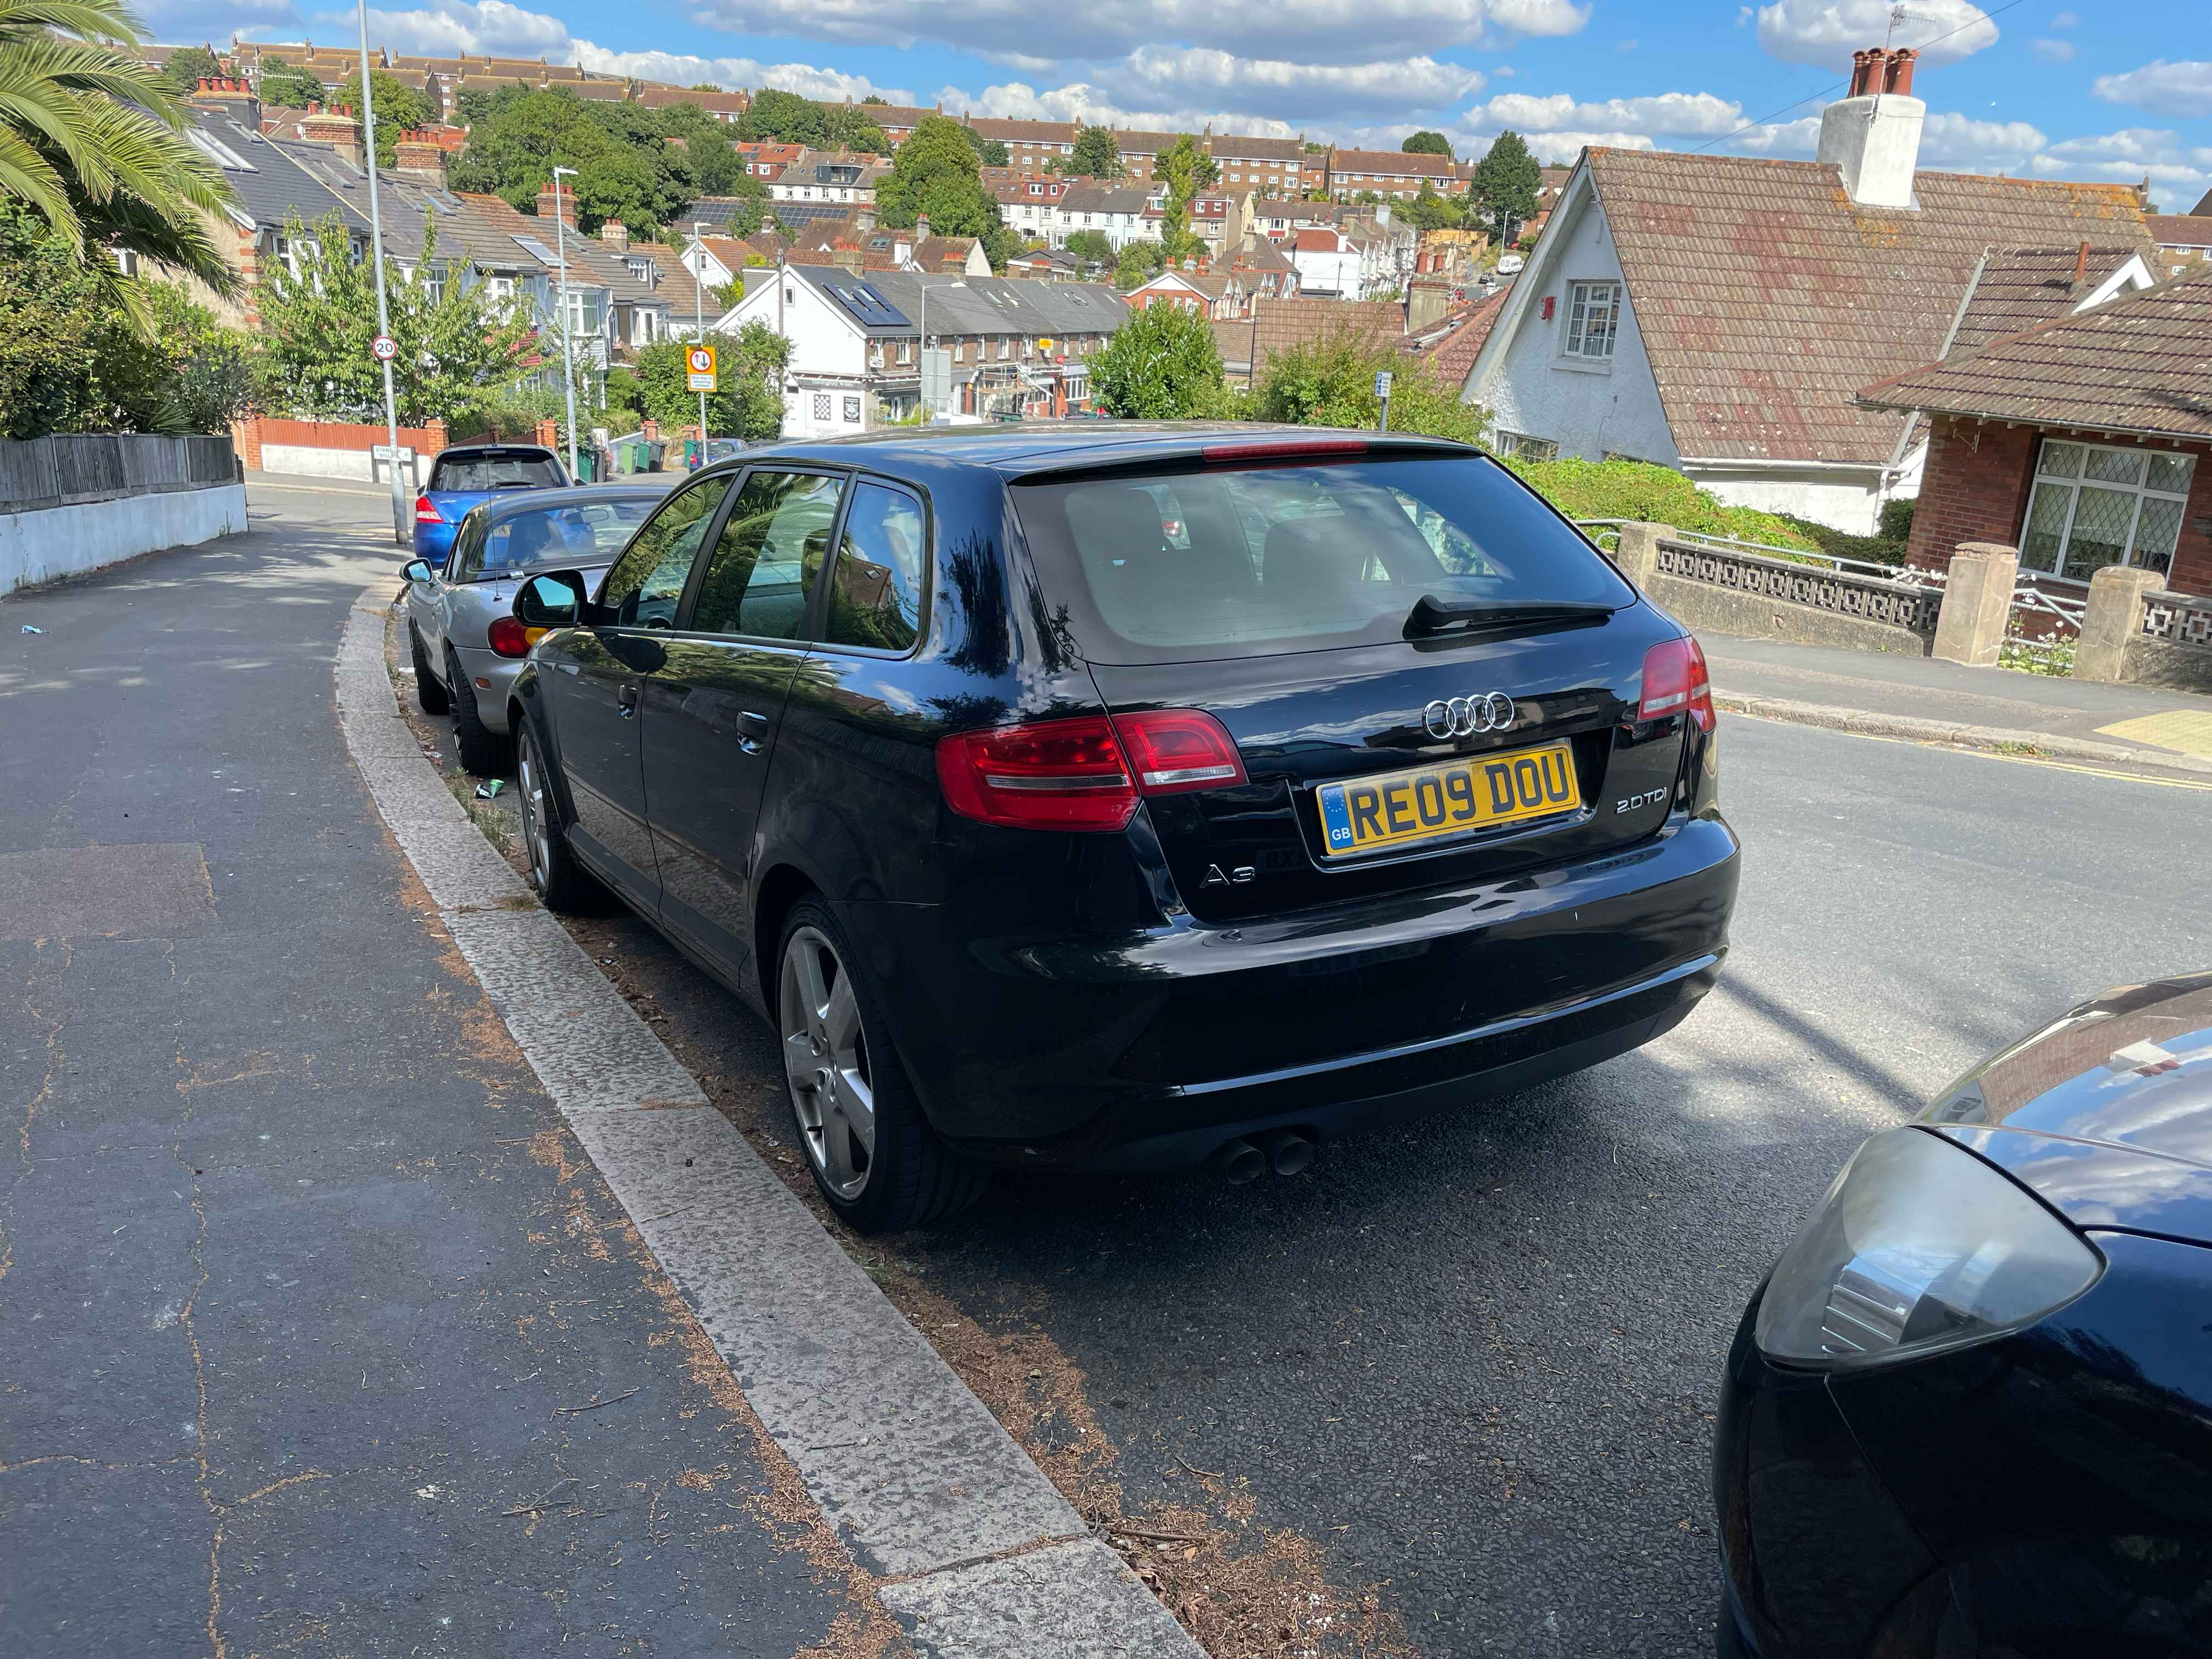 Photograph of RE09 DOU - a Black Audi A3 parked in Hollingdean by a non-resident who uses the local area as part of their Brighton commute. The first of six photographs supplied by the residents of Hollingdean.